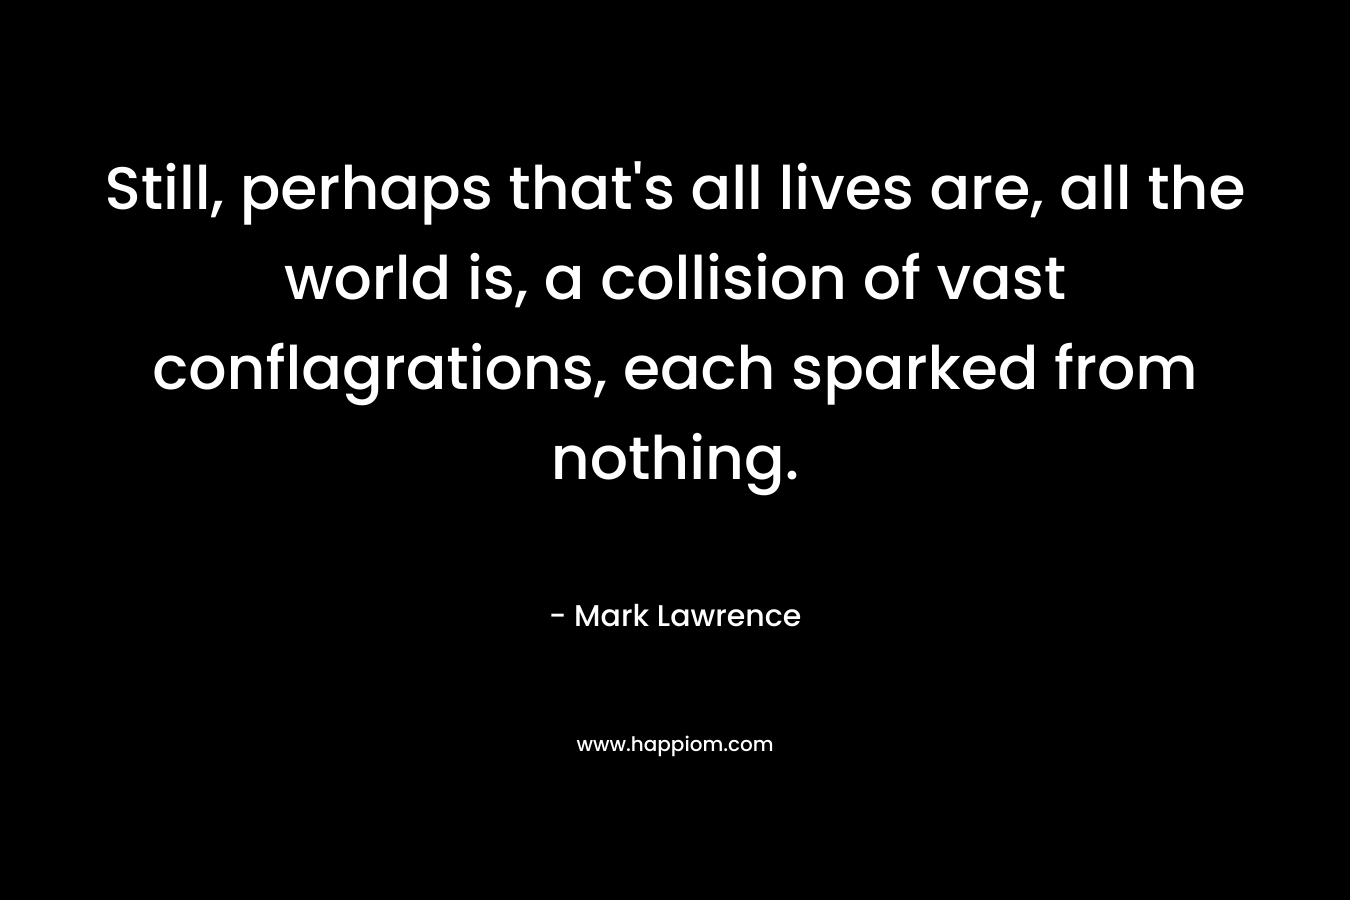 Still, perhaps that’s all lives are, all the world is, a collision of vast conflagrations, each sparked from nothing. – Mark  Lawrence